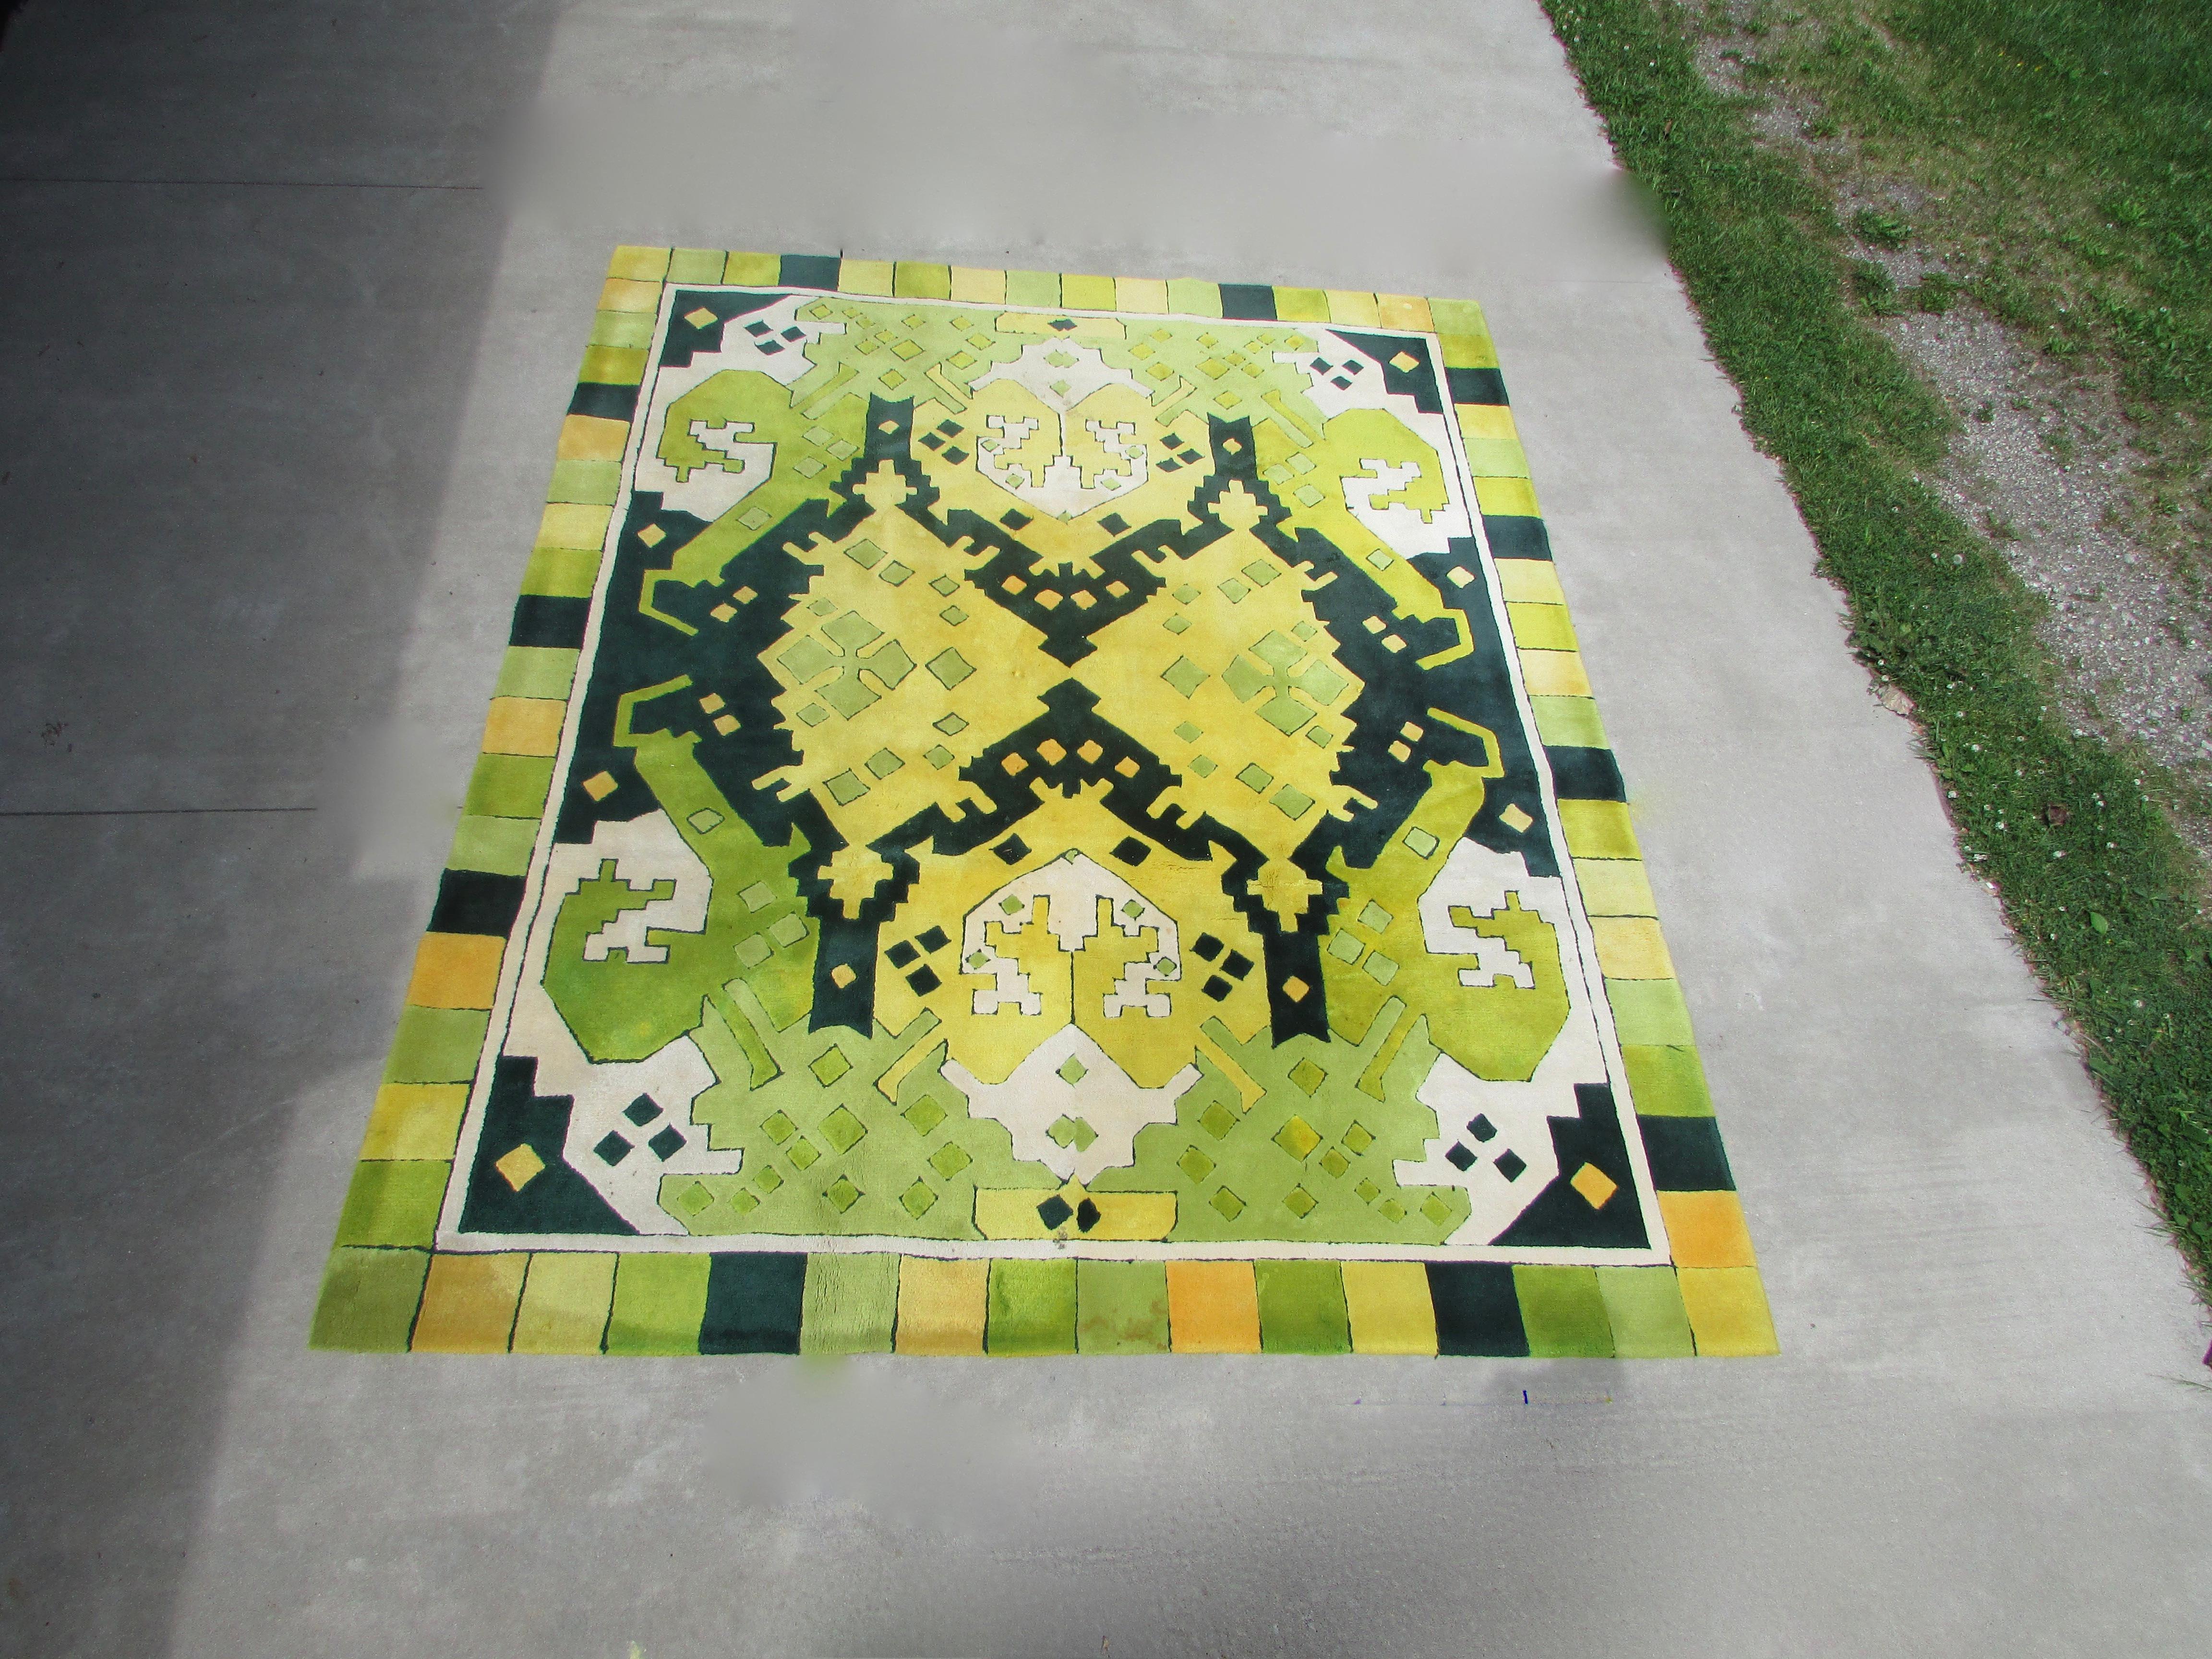 Large fun wool rug in lime green, dark green, yellow with white colors. A few minor spots shown.